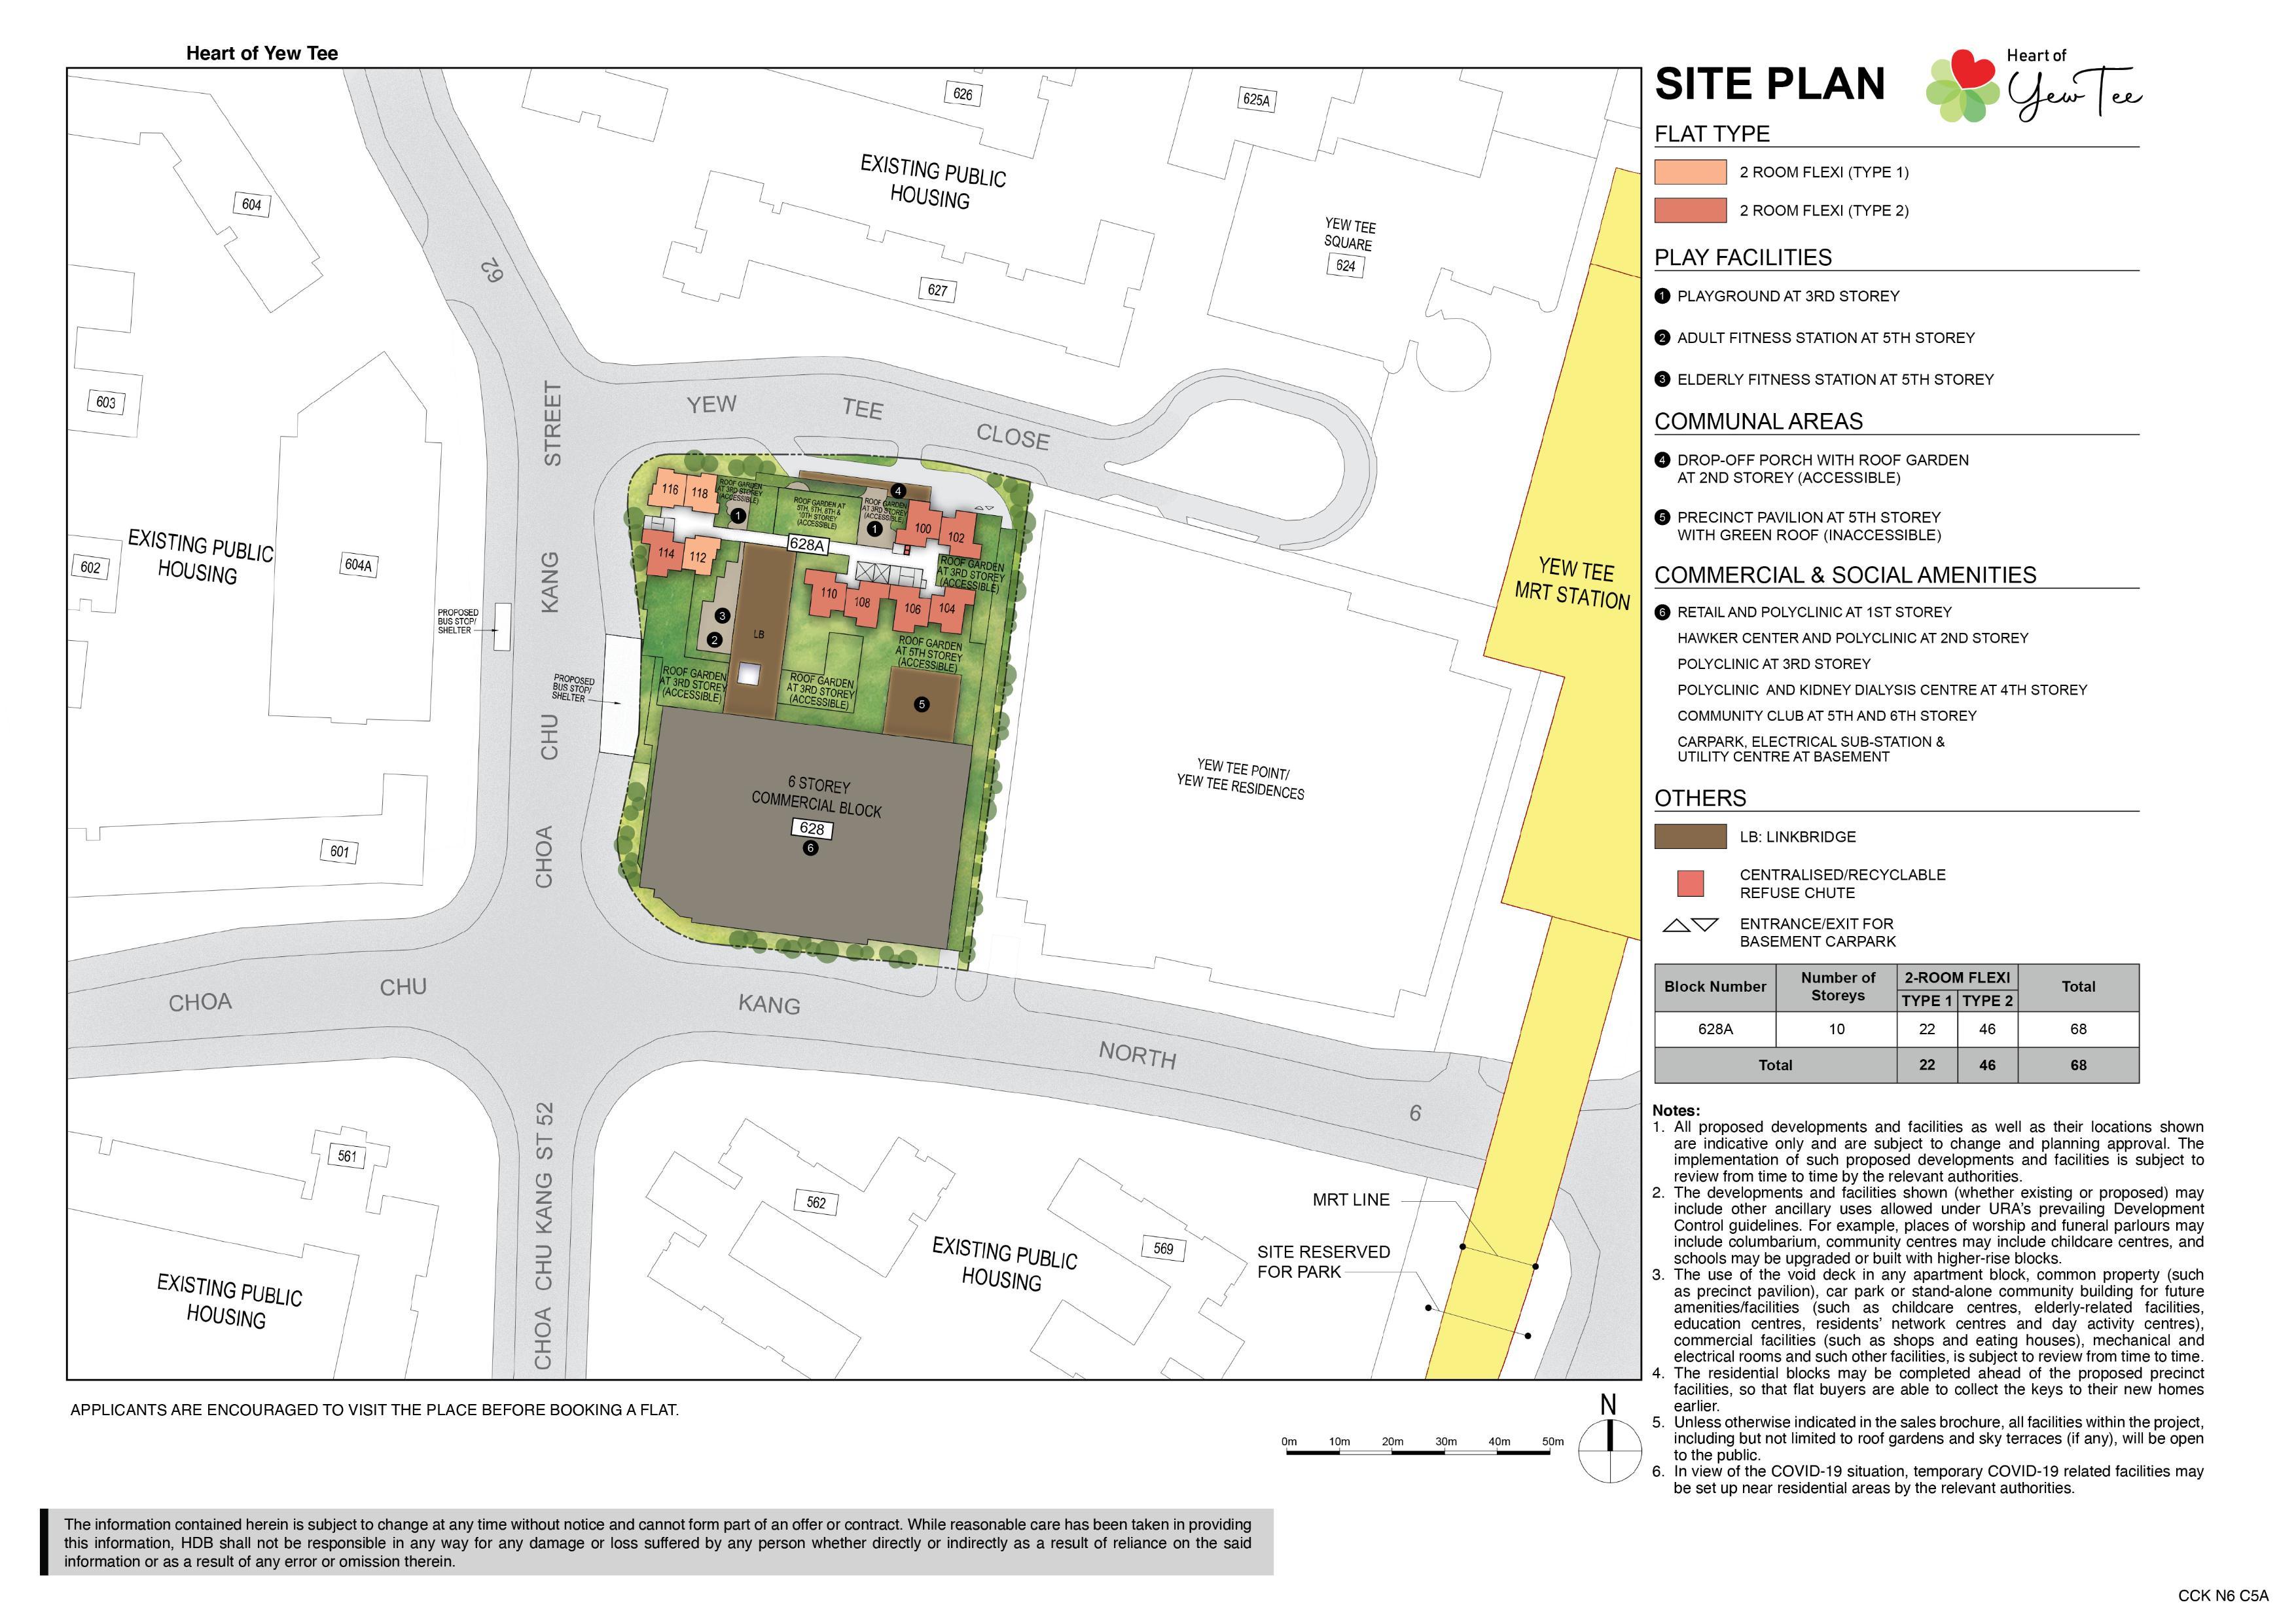 Heart of Yew Tee site-plan